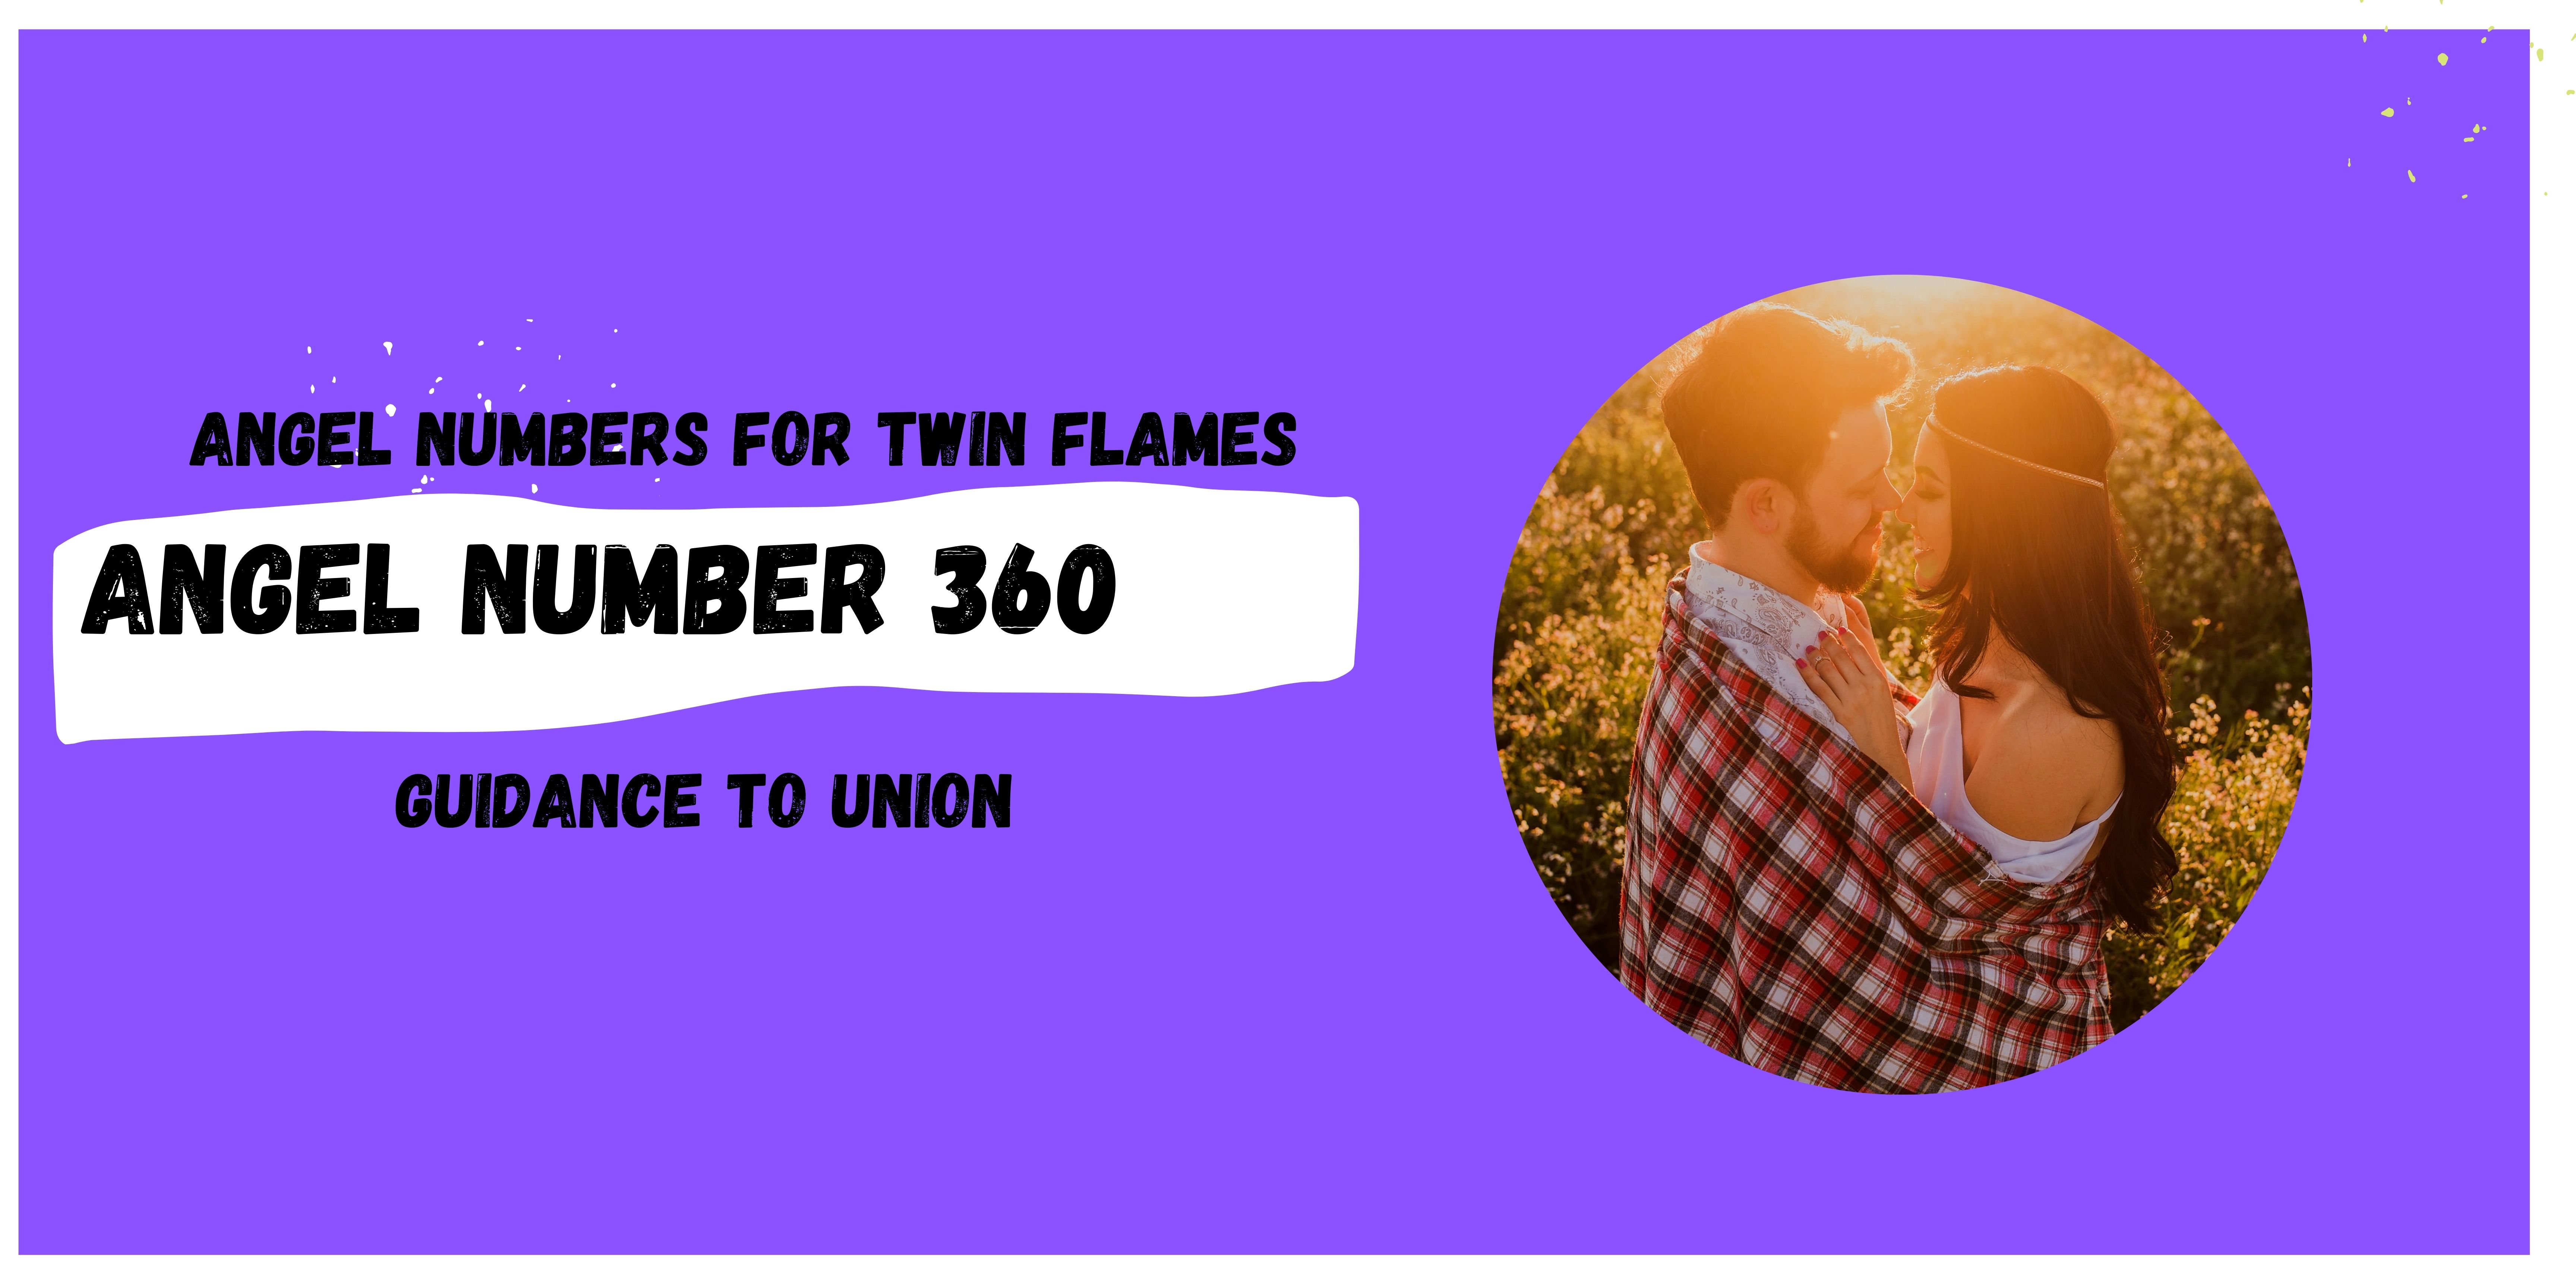 Meaning of Angel Number 360 for Twin Flames